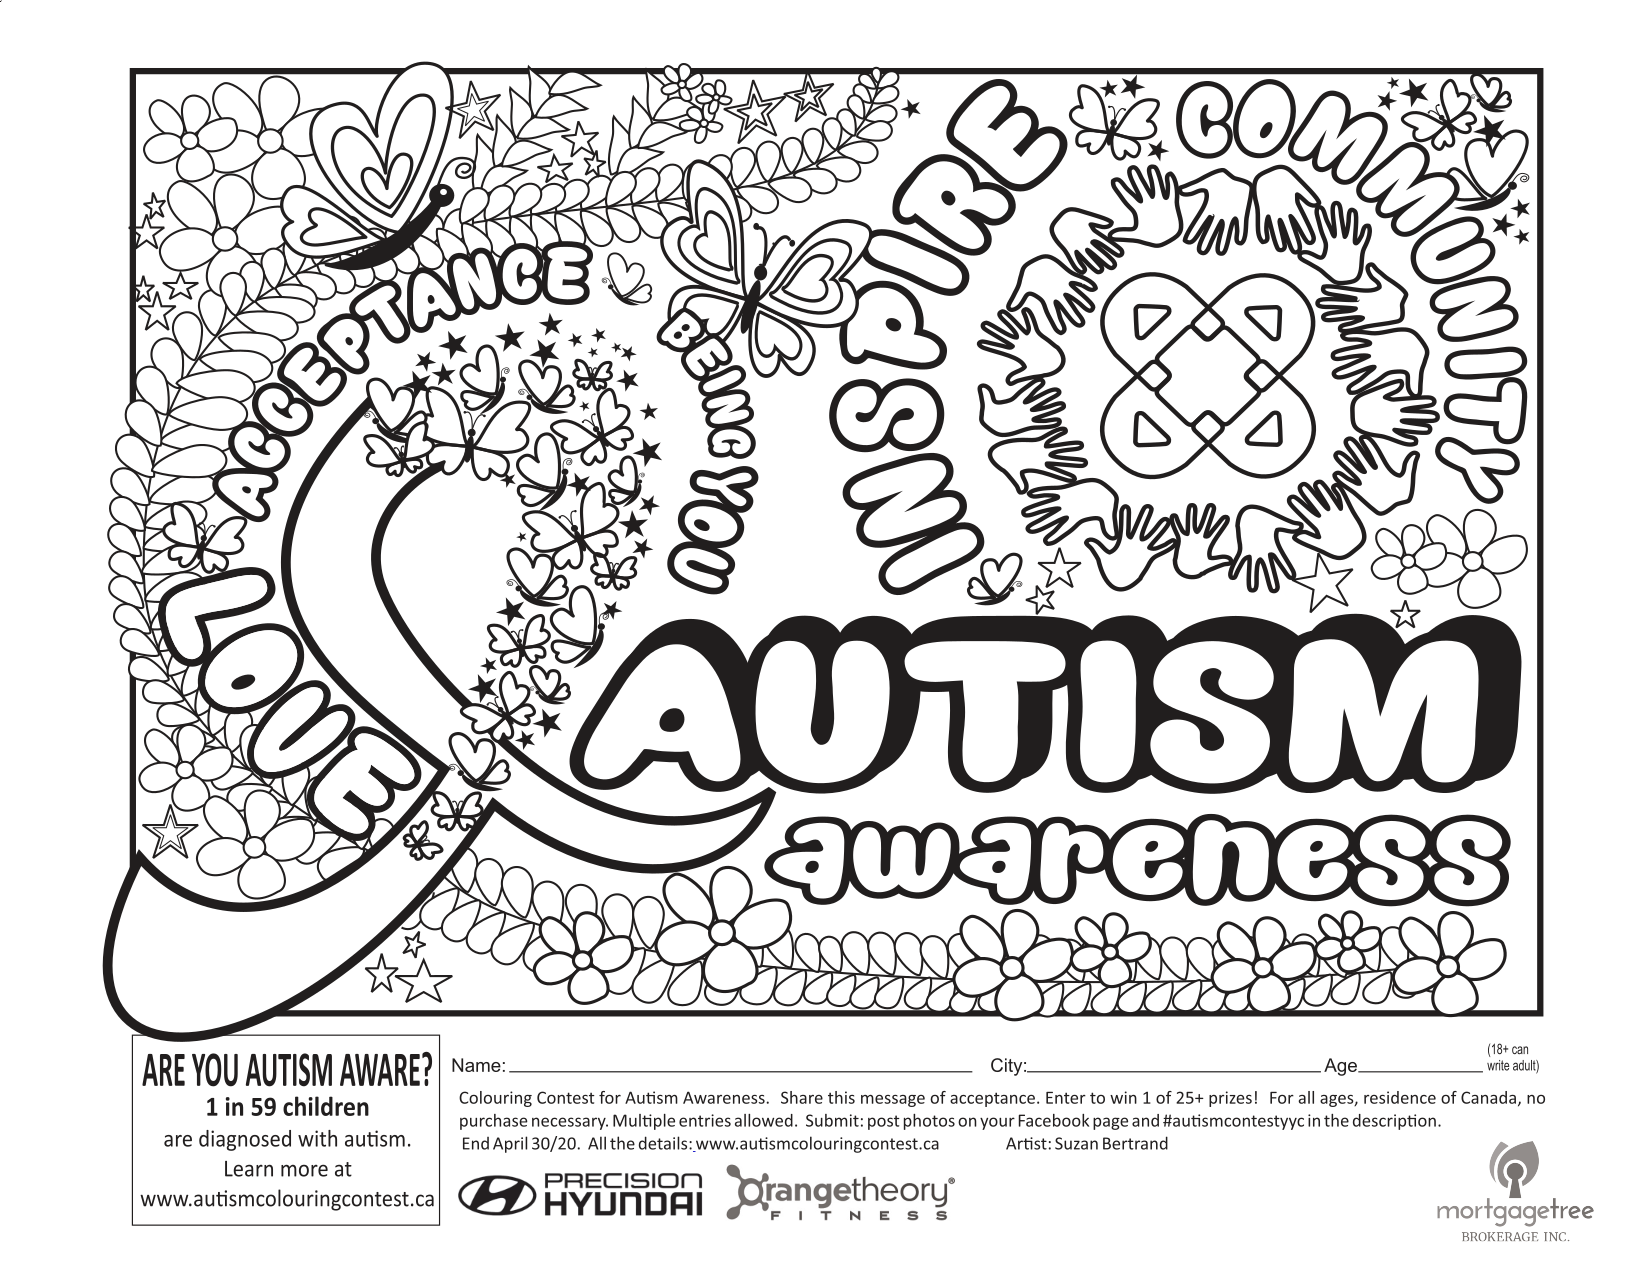 autism-awareness-colouring-contest-2020-mortgage-tree